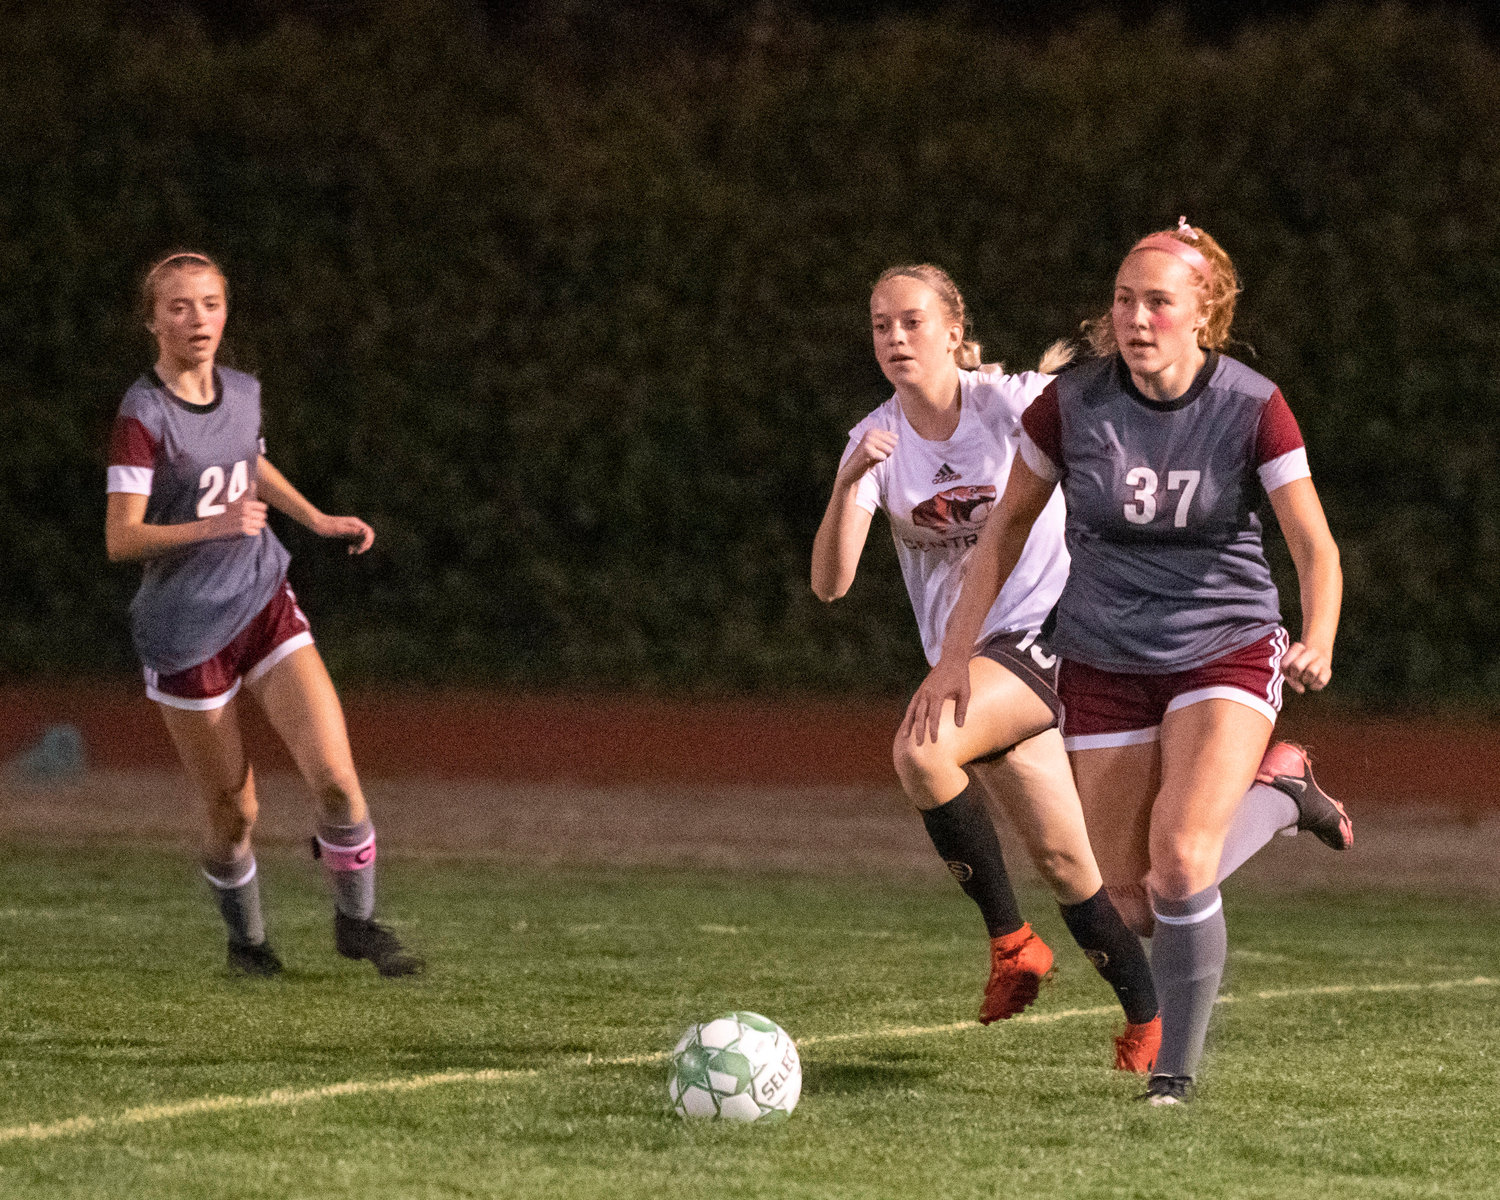 W.F. West's Hannah Meier runs with the ball during the second half of the Bearcats' 2-1 win over Centralia on Oct. 18.